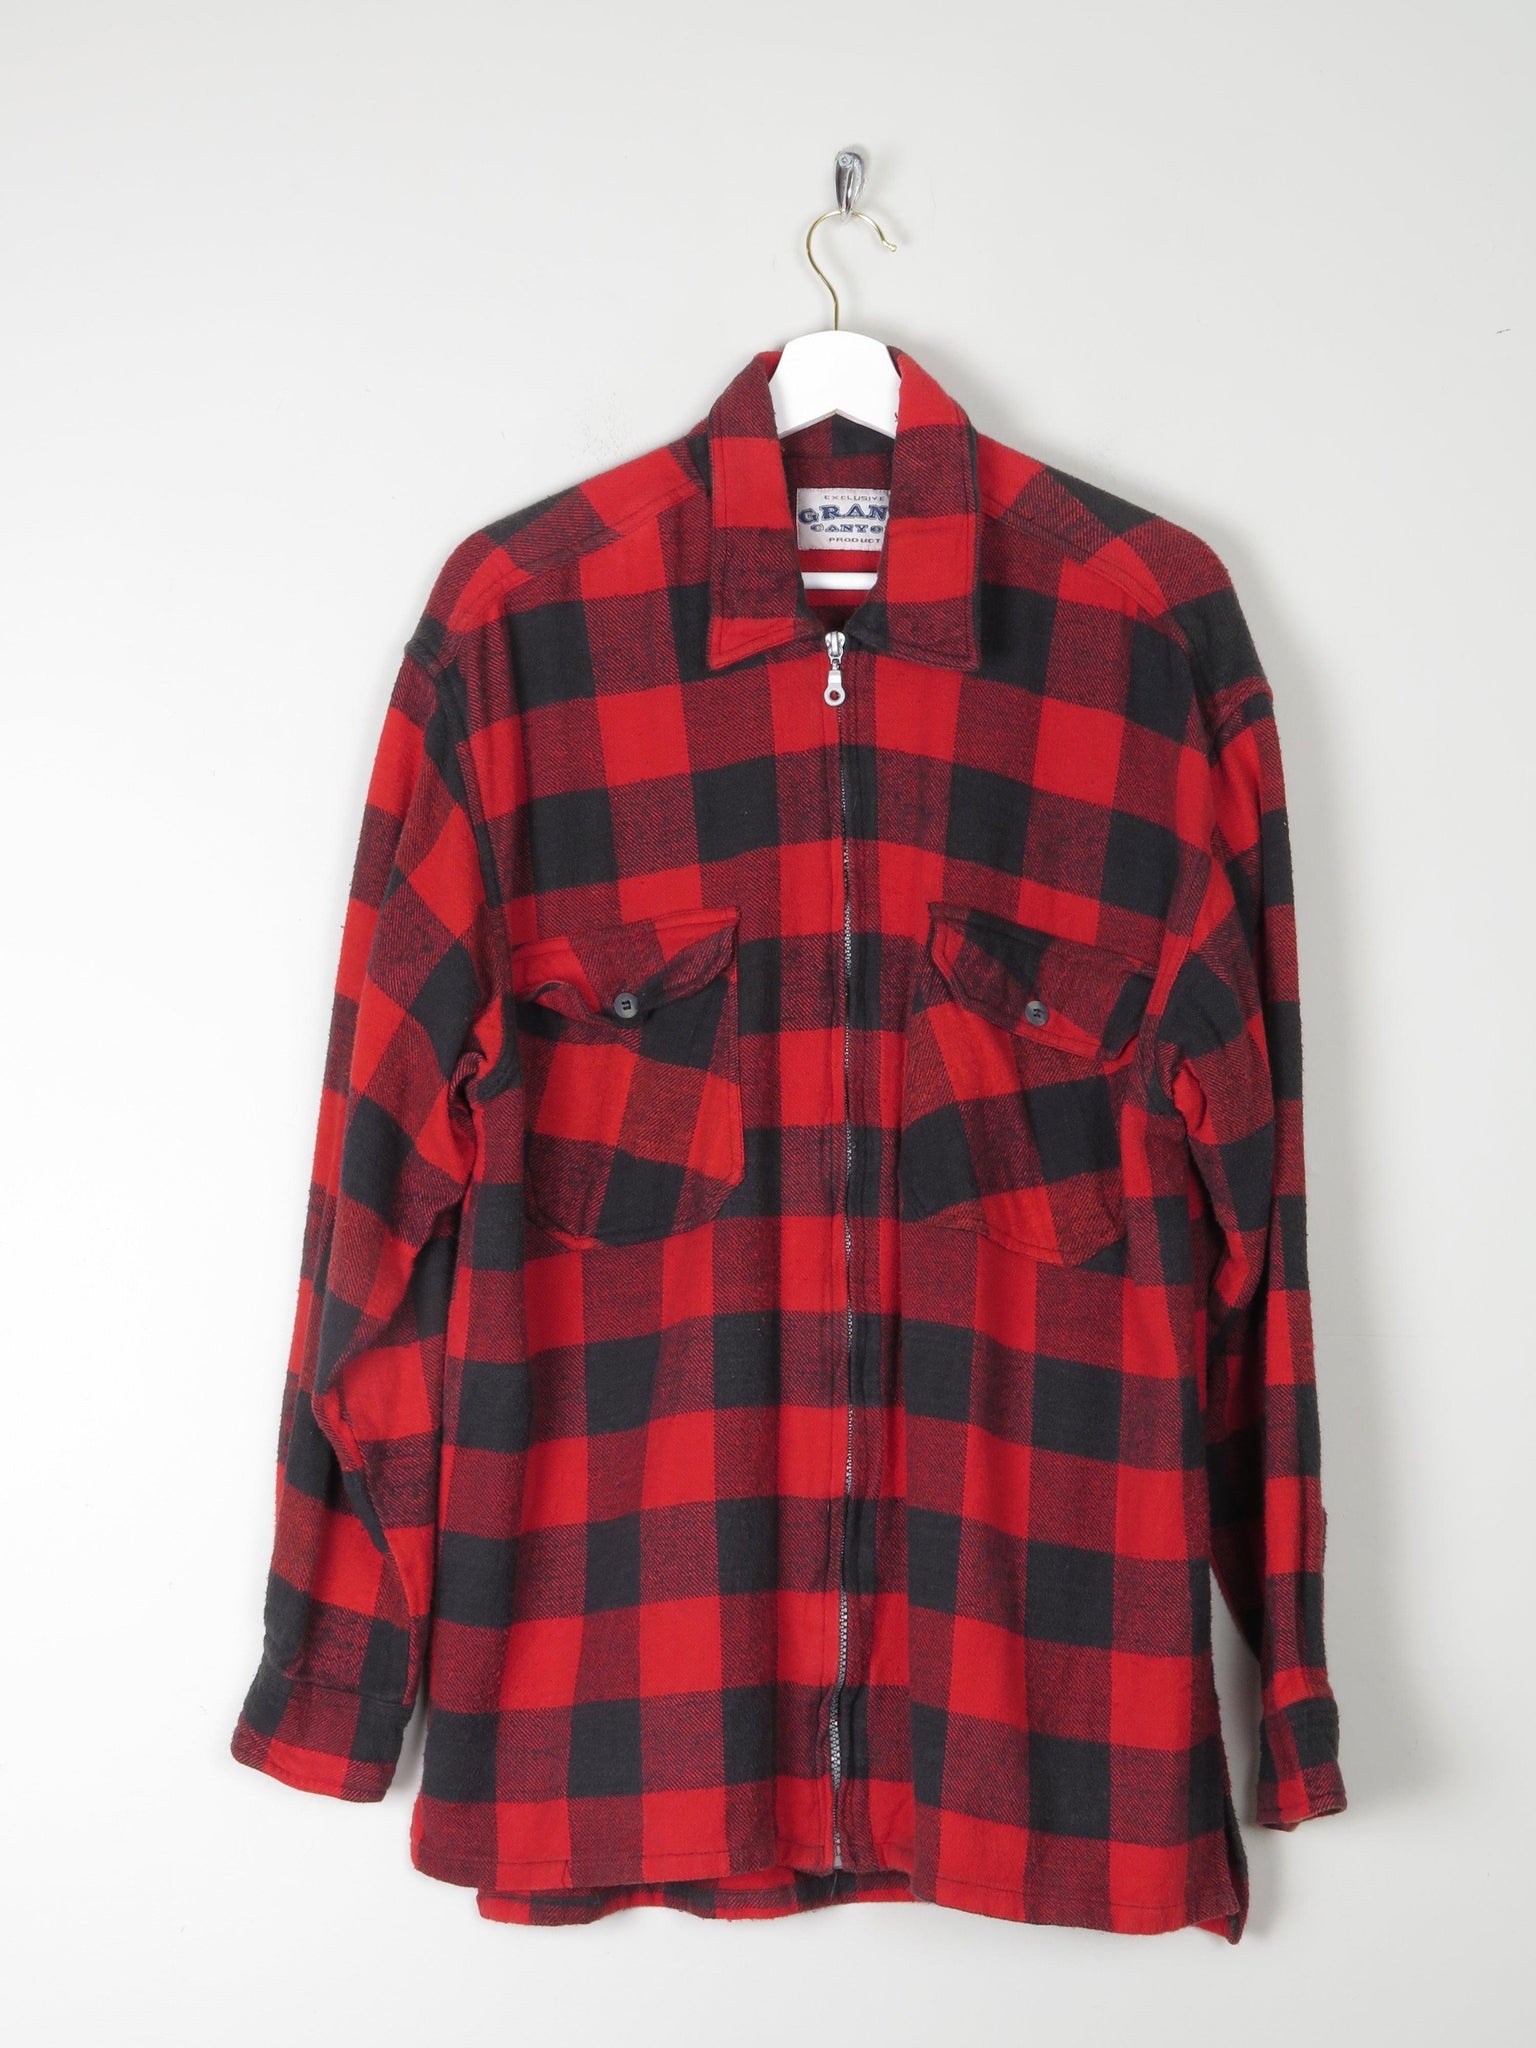 Men's Red & Black Flannel Shirt With Zip L - The Harlequin